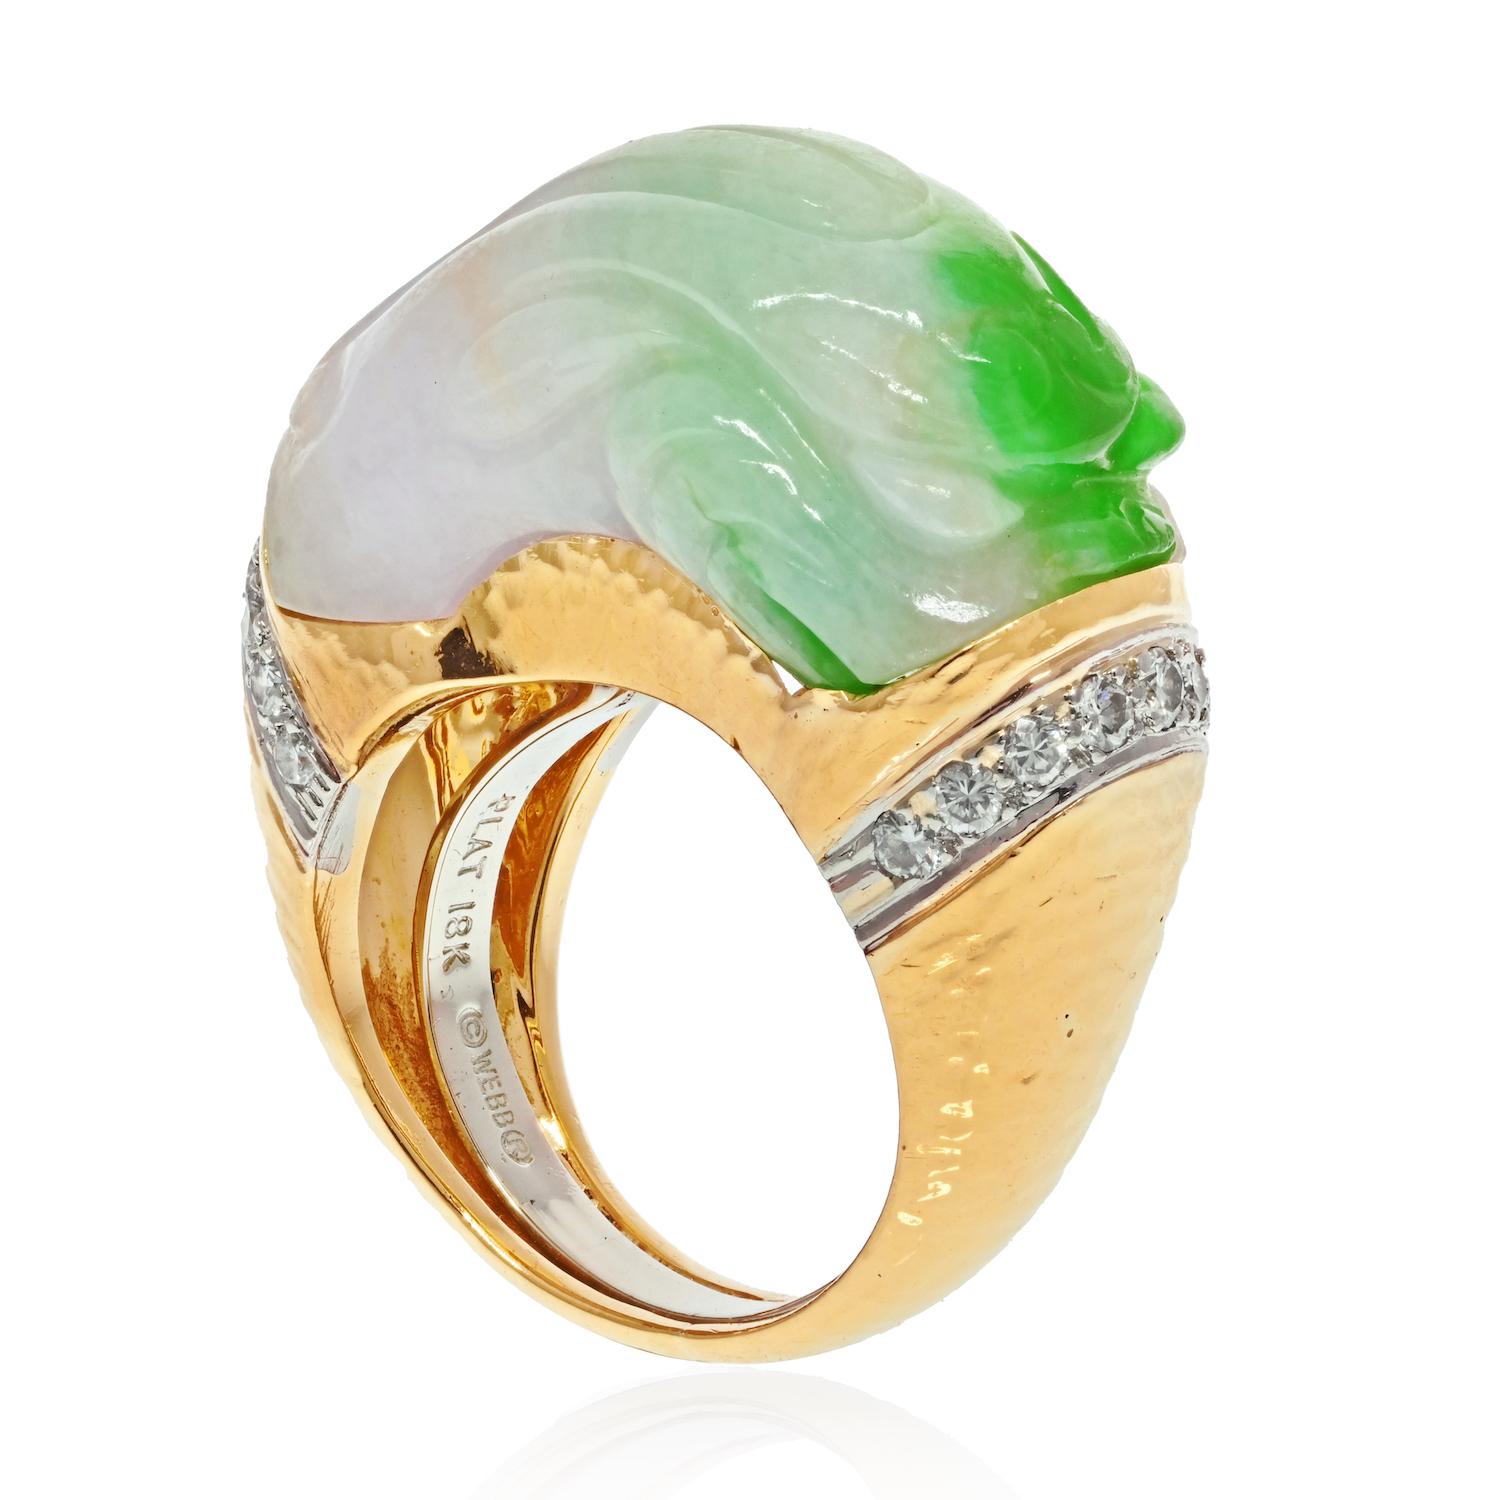 Embrace the allure of artistry with the David Webb Platinum & 18K Yellow Gold Carved Jade and Diamond Ring. This ring stands as a testament to meticulous craftsmanship and creative design, a remarkable fusion of elements that captures attention and